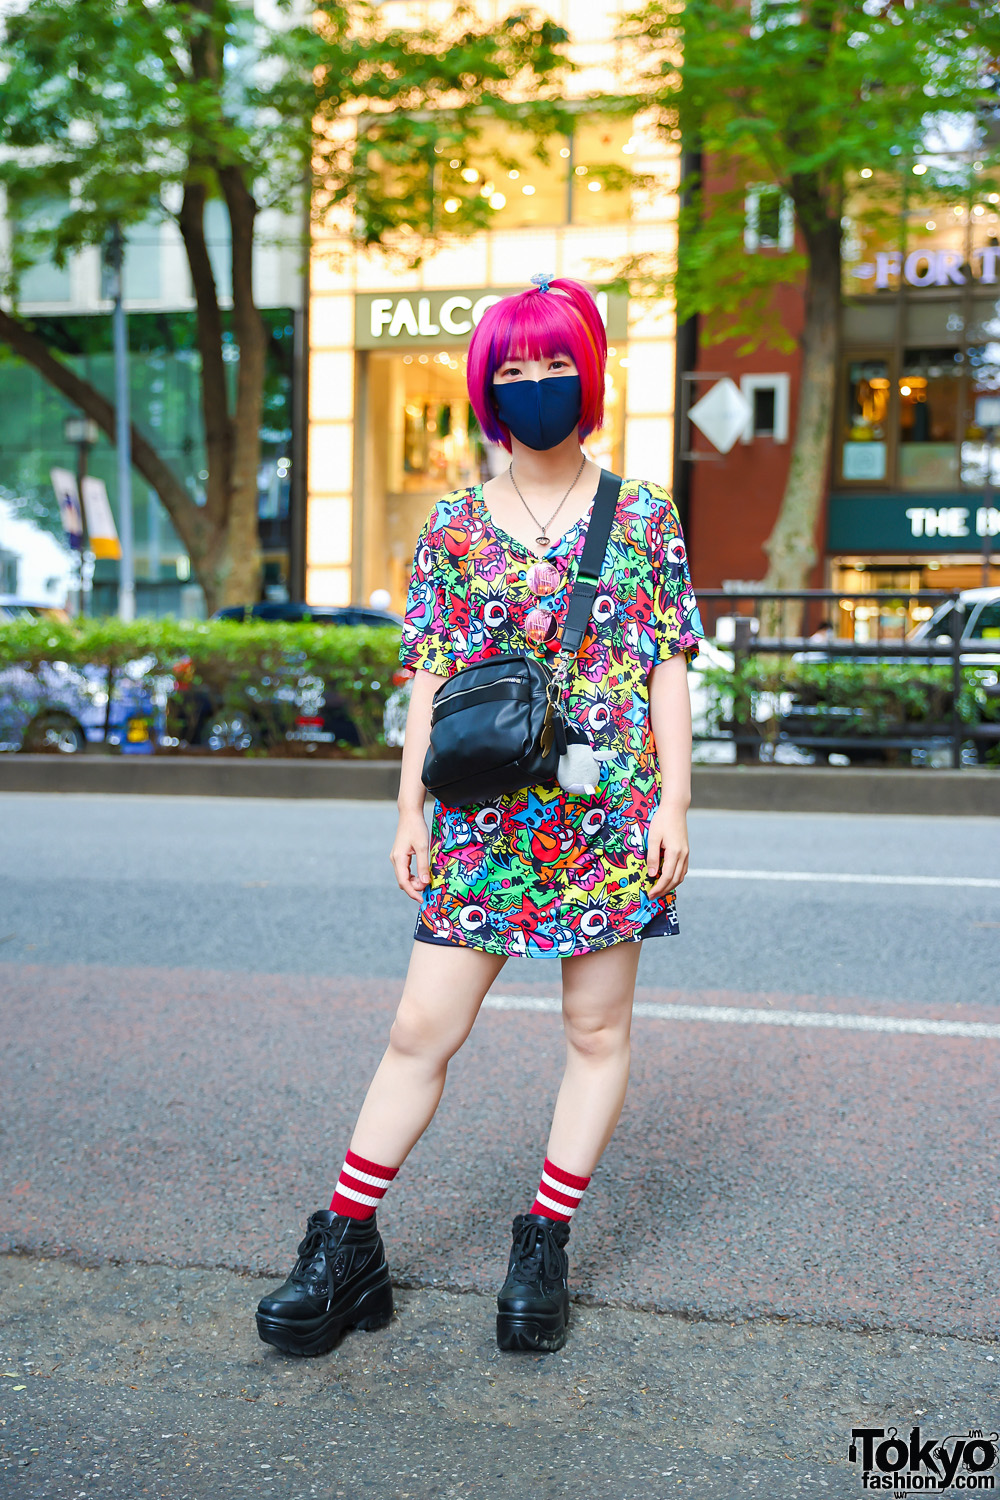 Tokyo Girl w/ Pink Hair in ACDC Rag Printed Shirt, Crossbody Bag, Lace-Up Platform Shoes & Vivienne Westwood Pendant Necklace